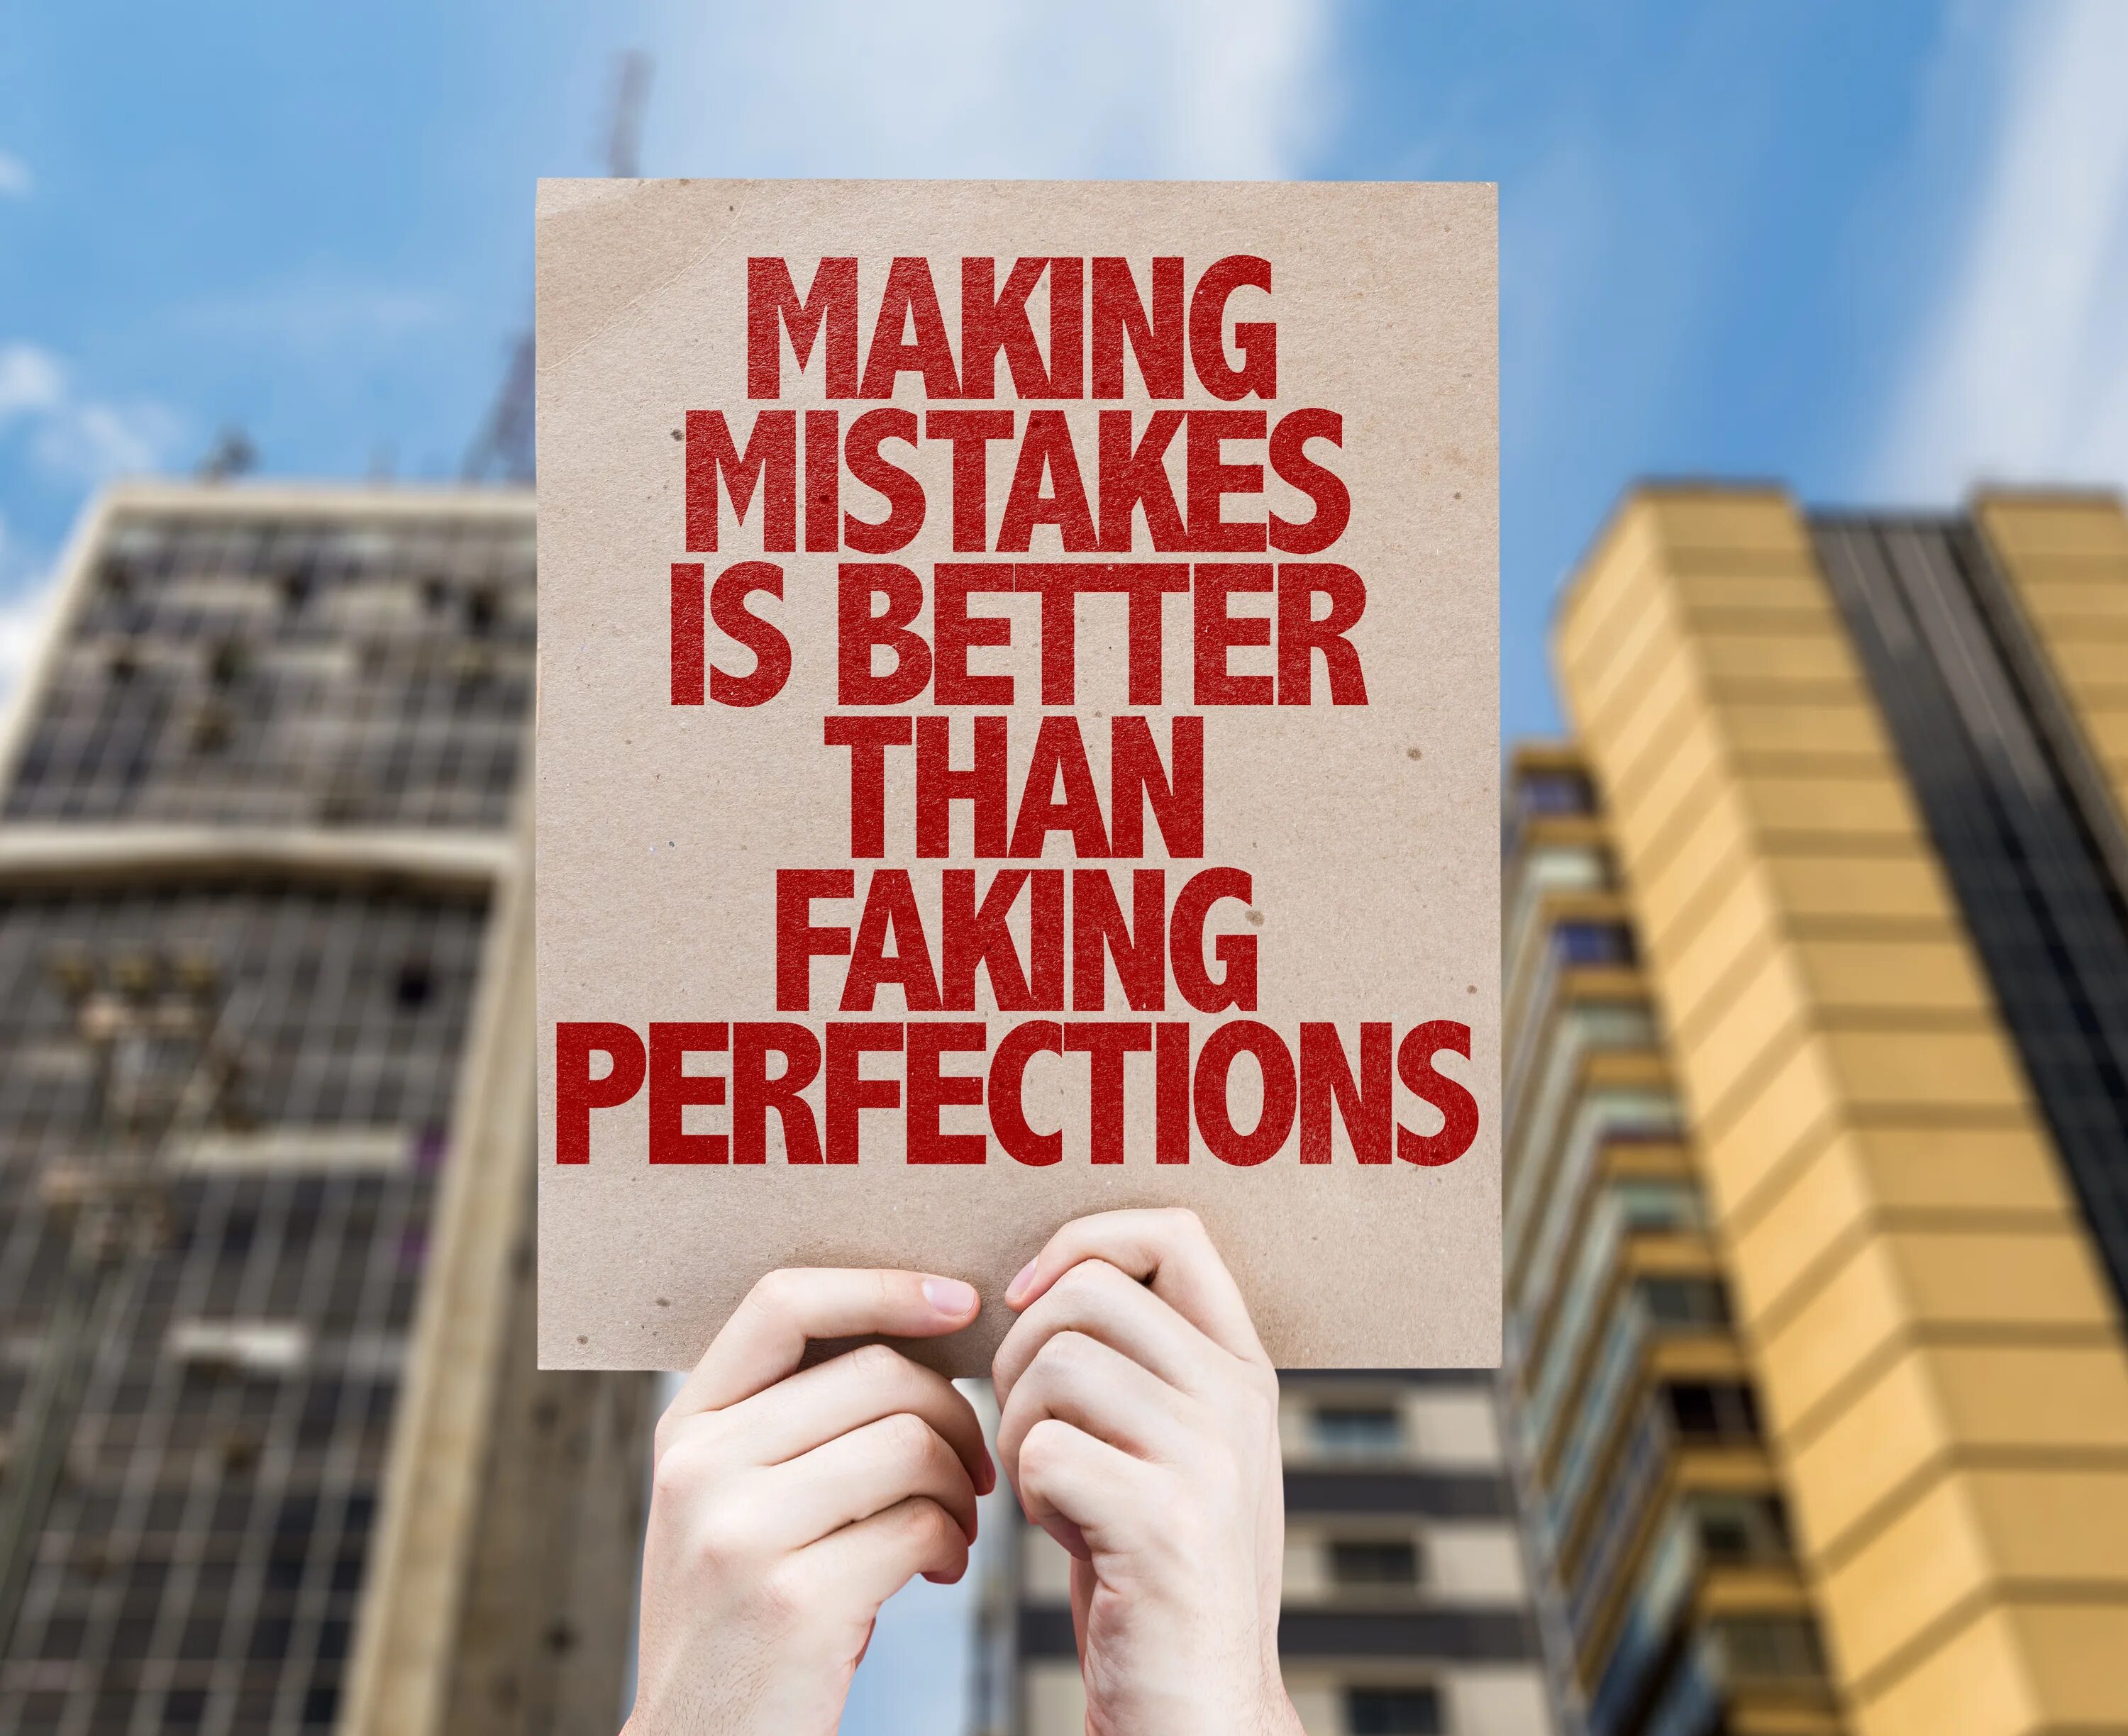 Making mistakes. Making mistakes is better than Faking perfections. Better than под. Better mistakes. Make mistake good